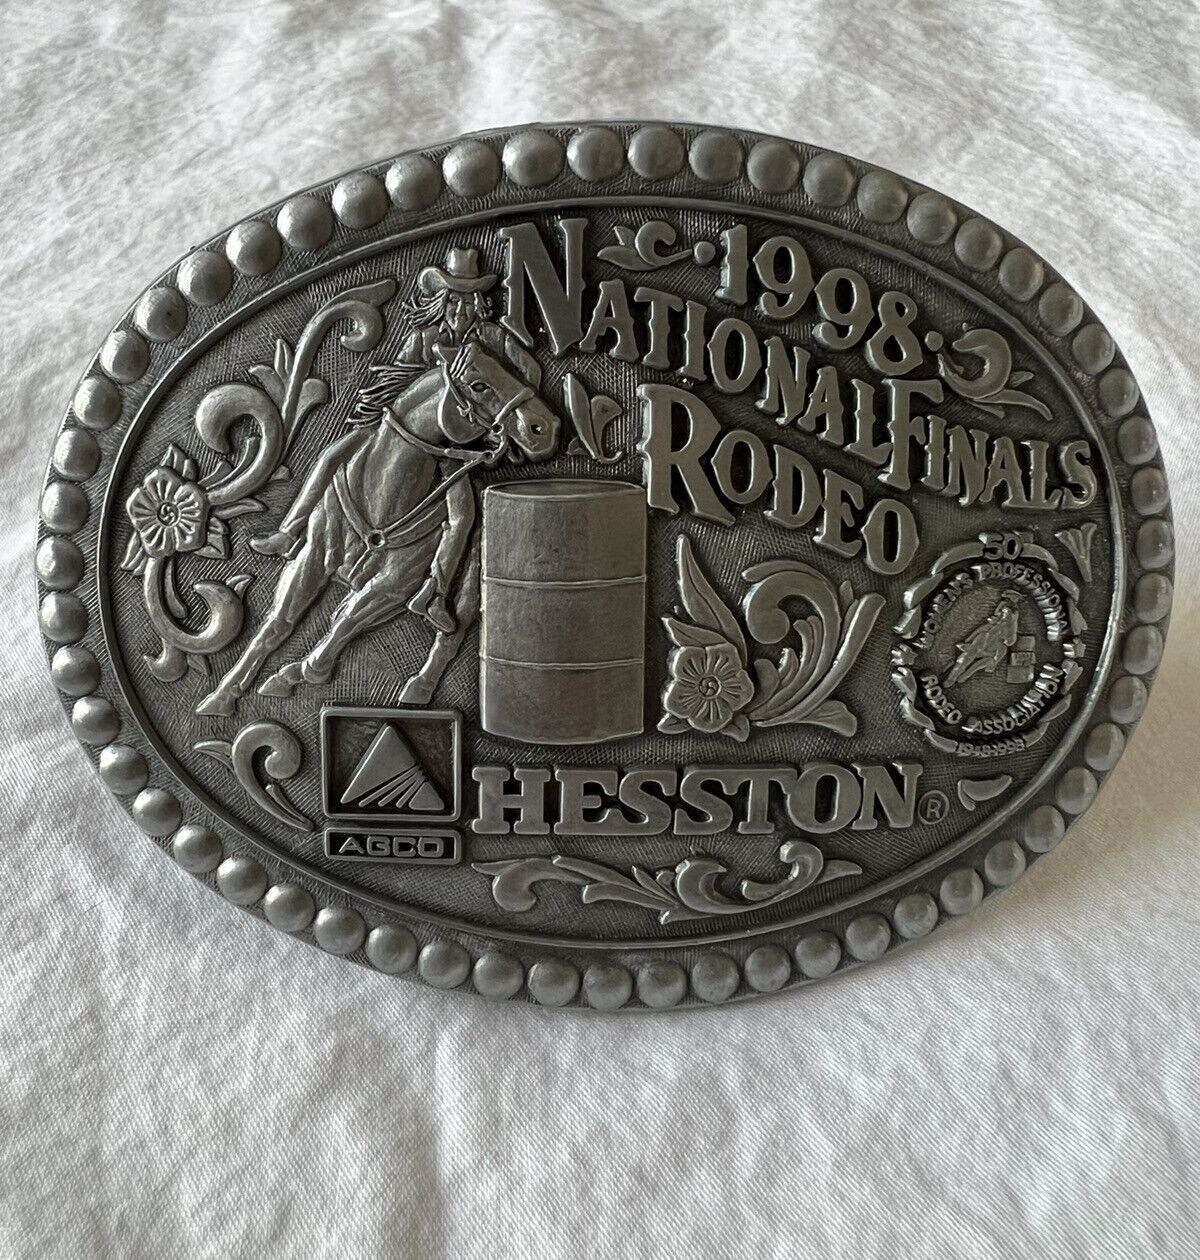 VTG Hesston National Finals Rare Rodeo 1998 NFR Belt Buckle AGCO Series Limited